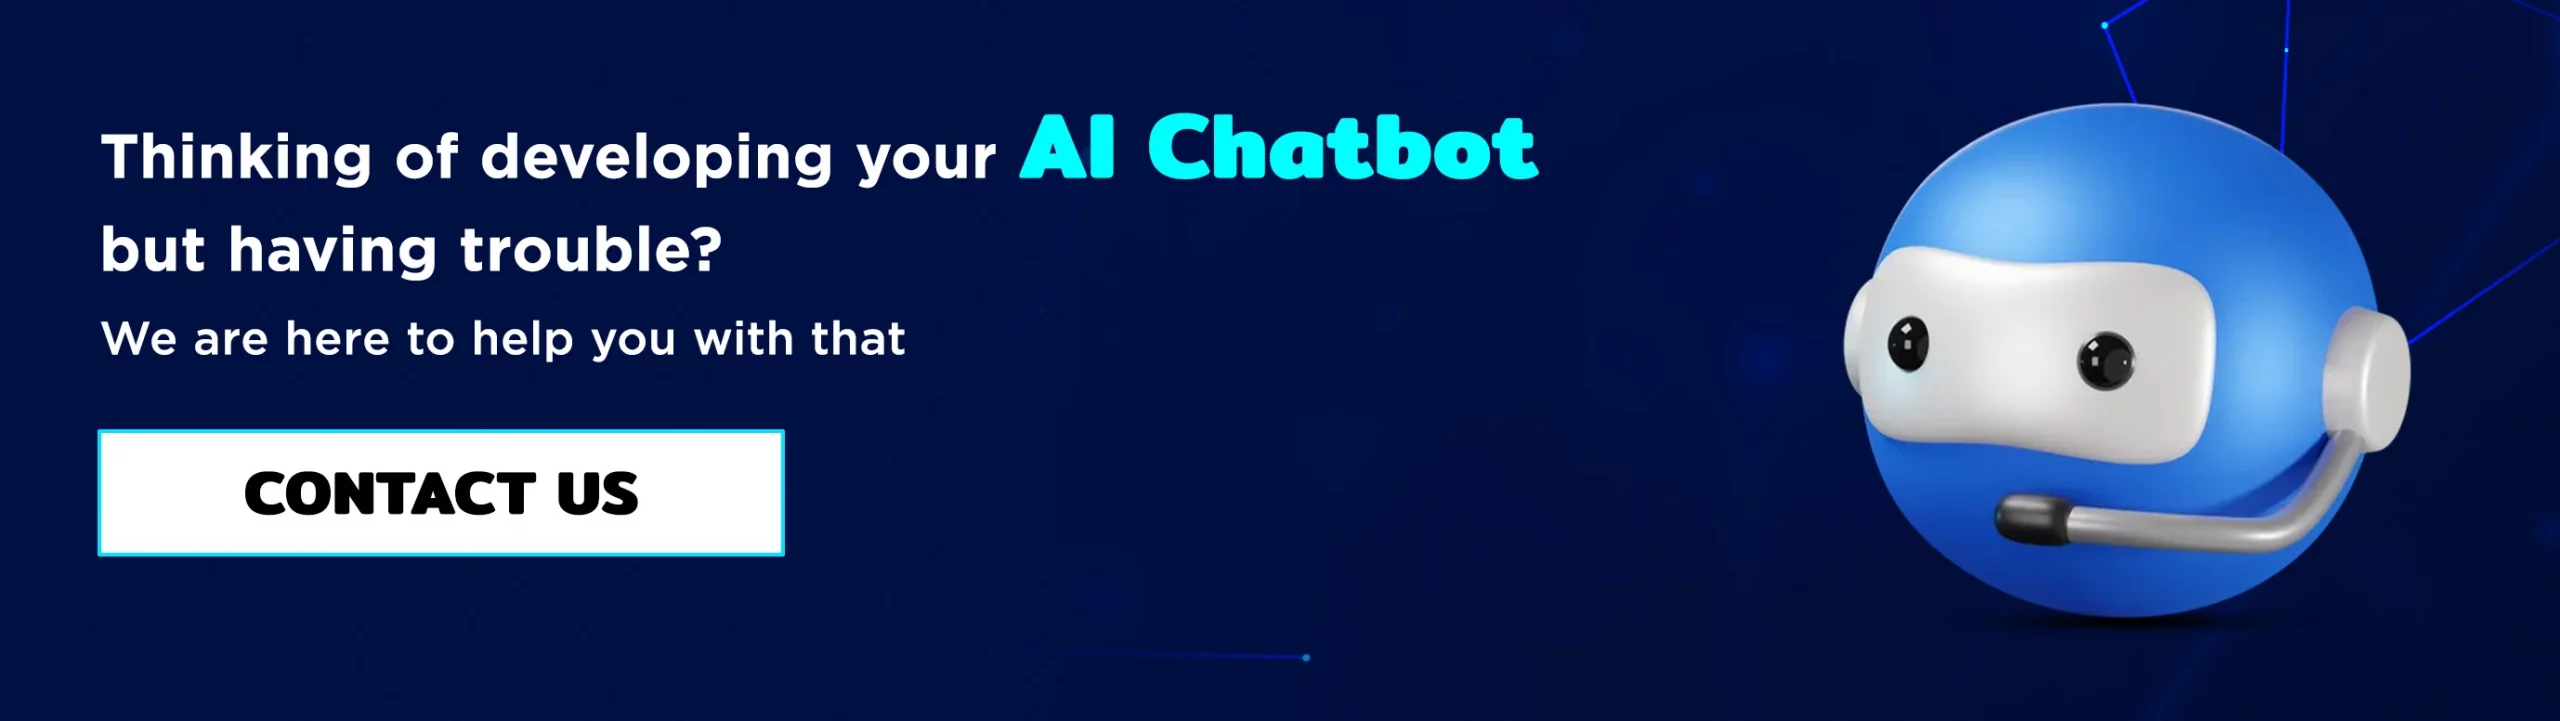 Thinking-of-developing-your-AI-Chatbot-but-having-trouble-CTA